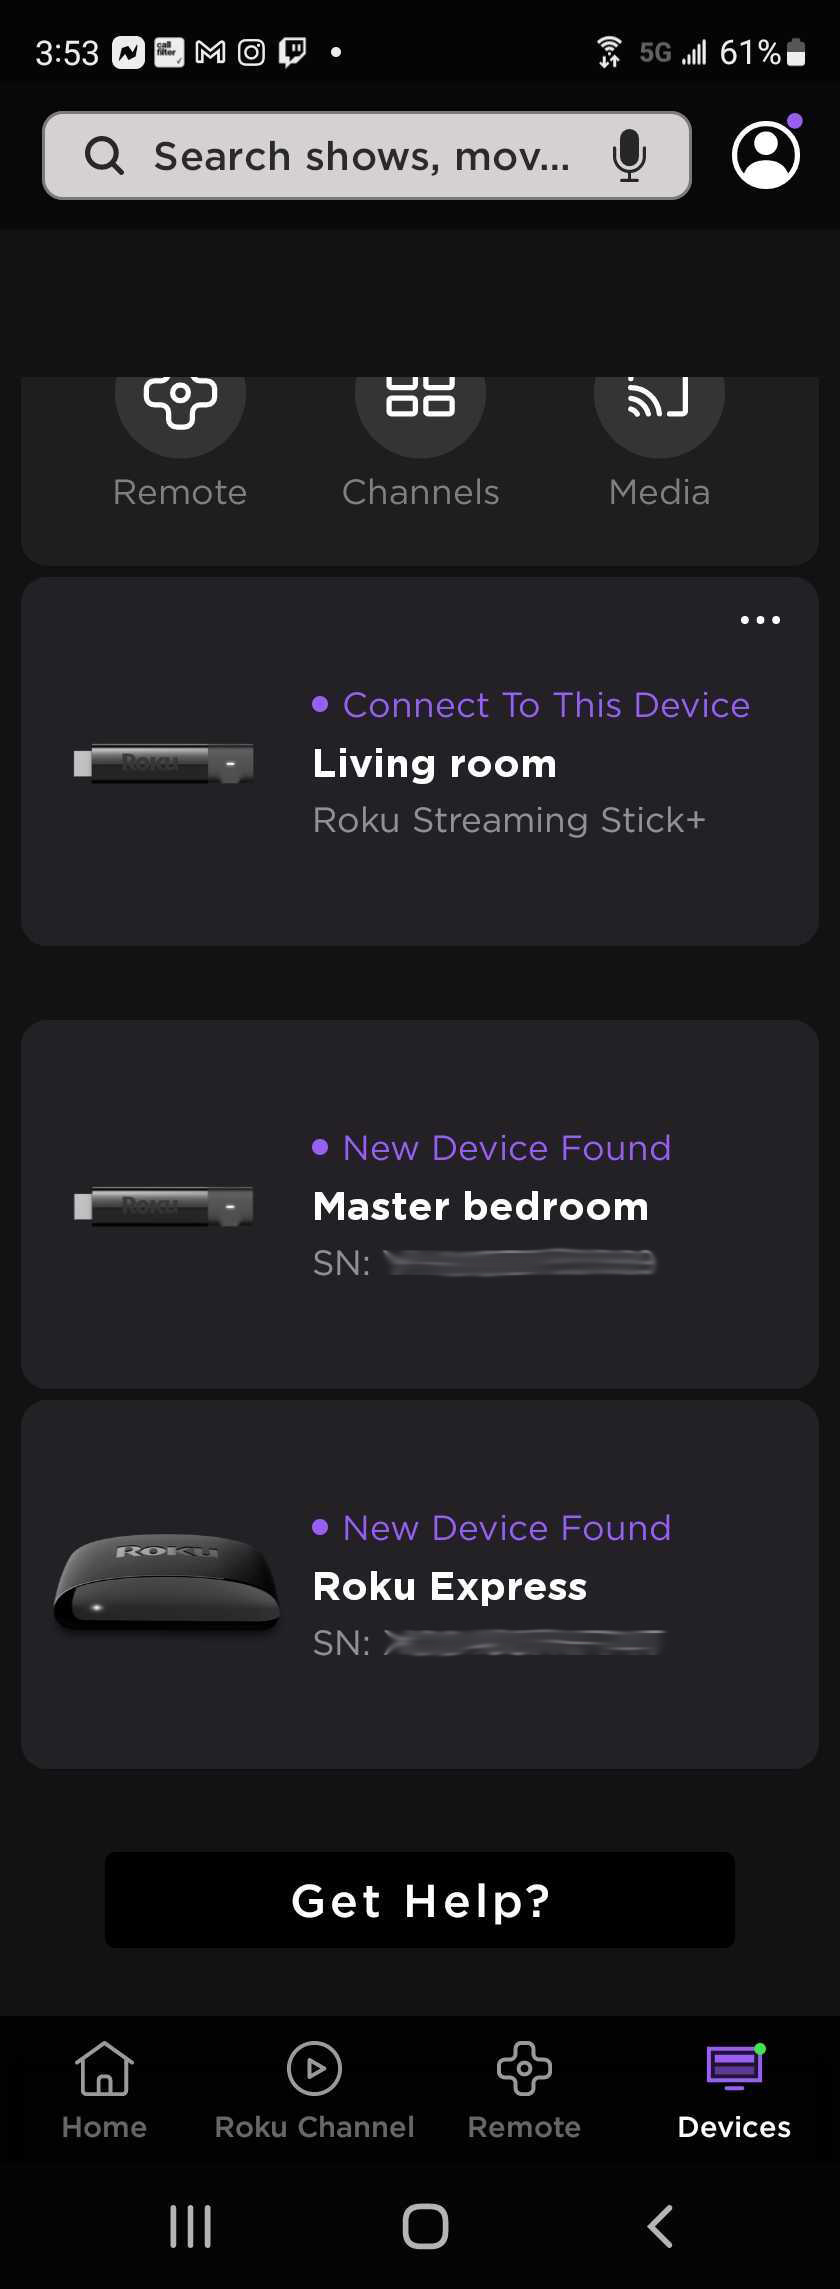 Devices tab in the Roku Android app